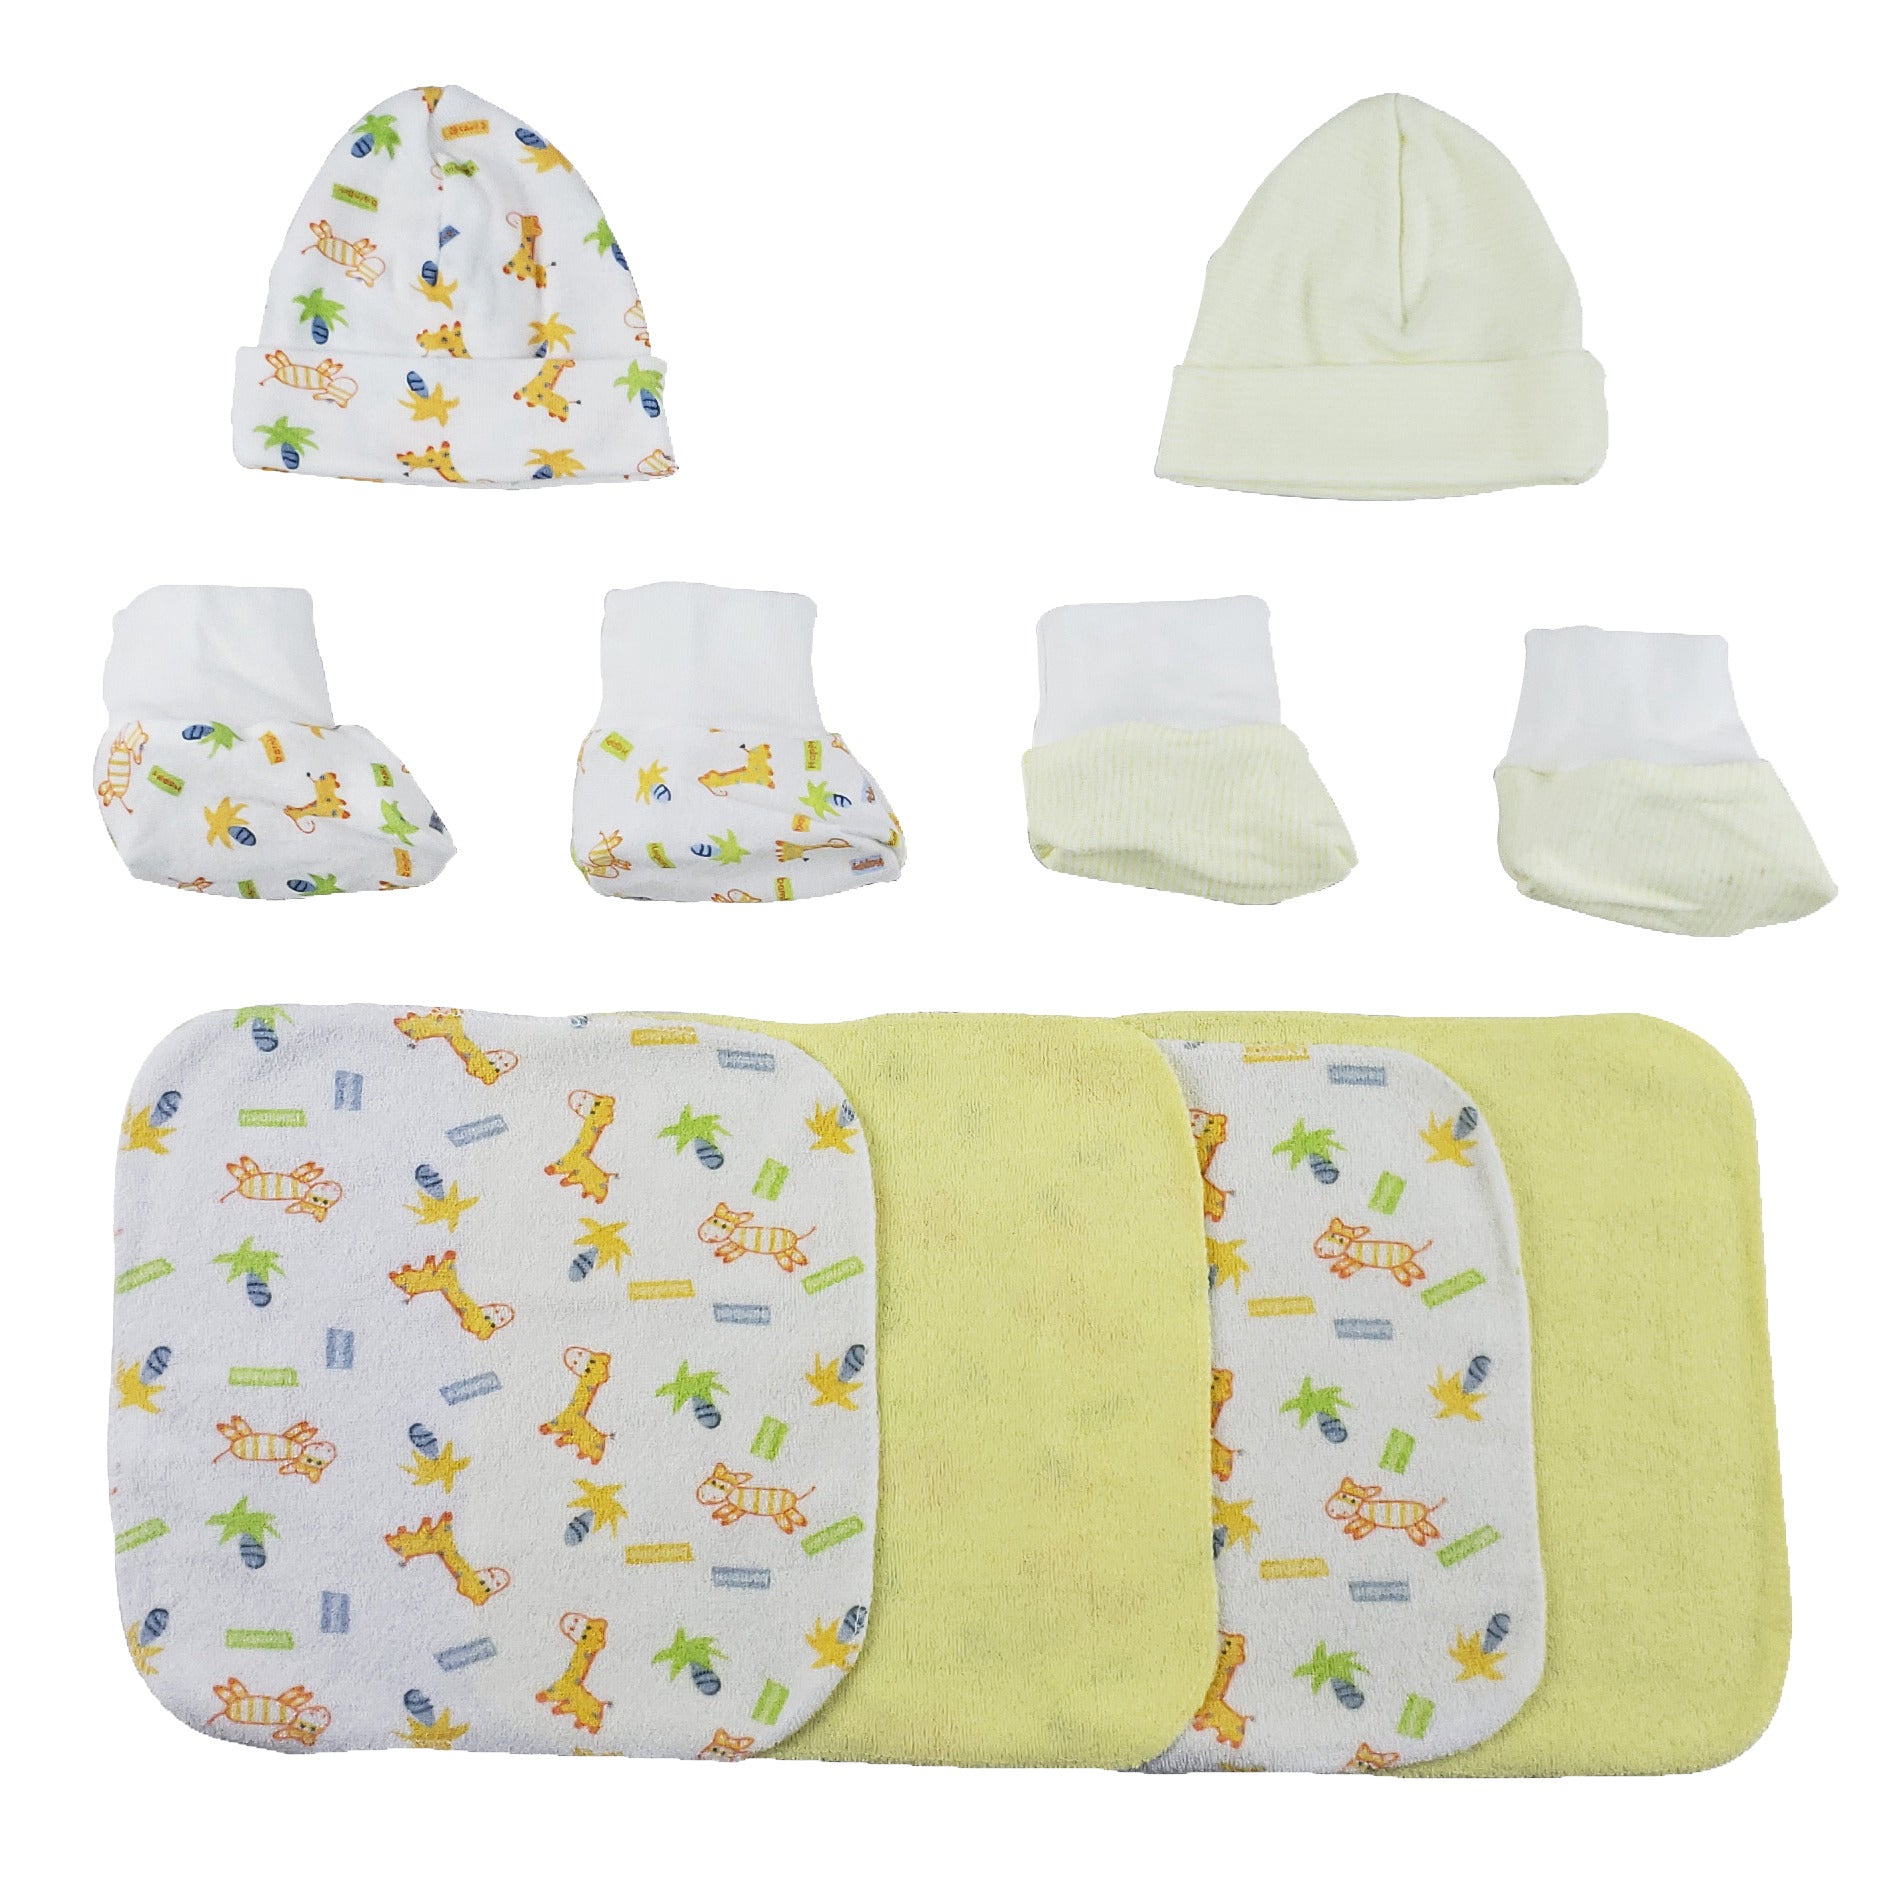 Two Rib Knit Infant Caps And Booties Sets And Four Washcloths - 8 Pc Set GreatEagleInc